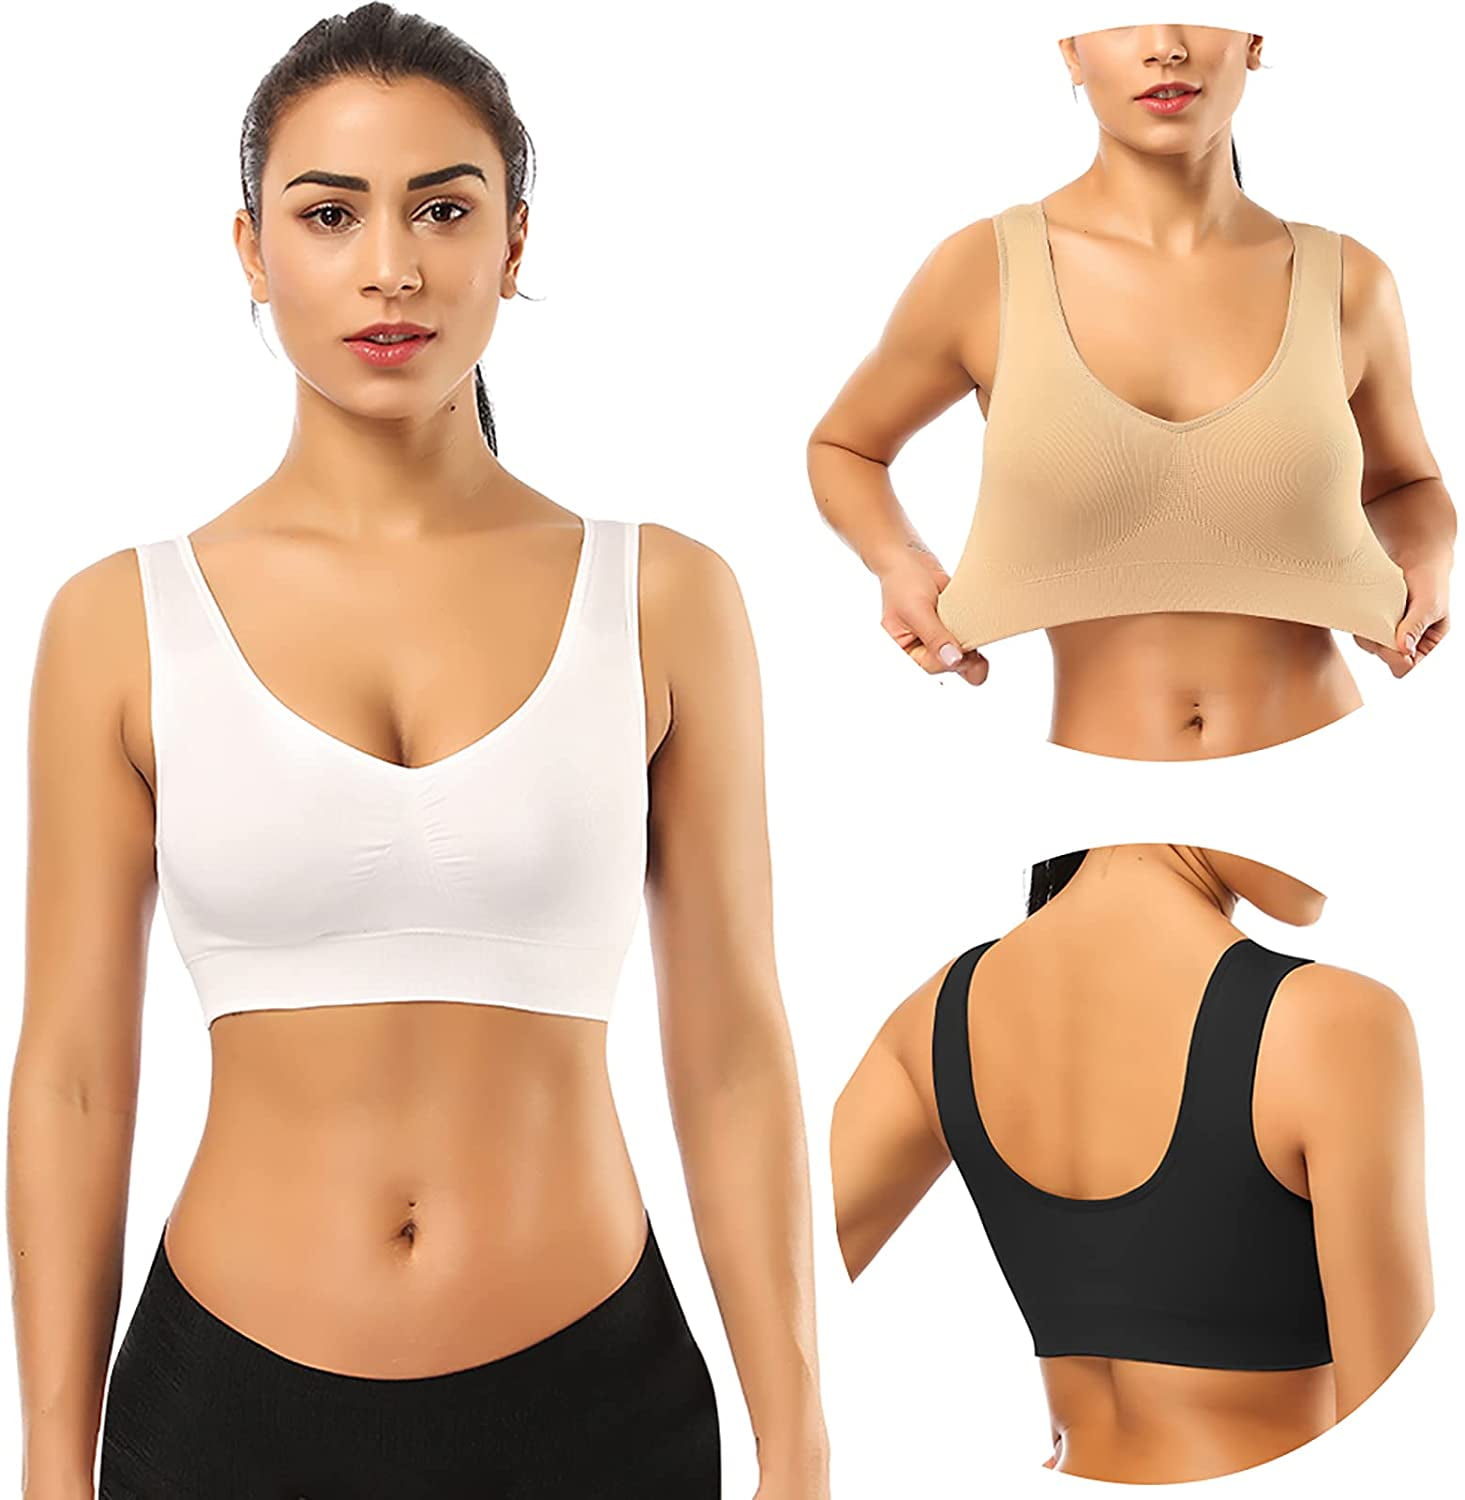  Women's Comfortable Ultimate Comfy Medium Support Sport Bra 3  Pack Plus Size Random Color (XXL) : Clothing, Shoes & Jewelry